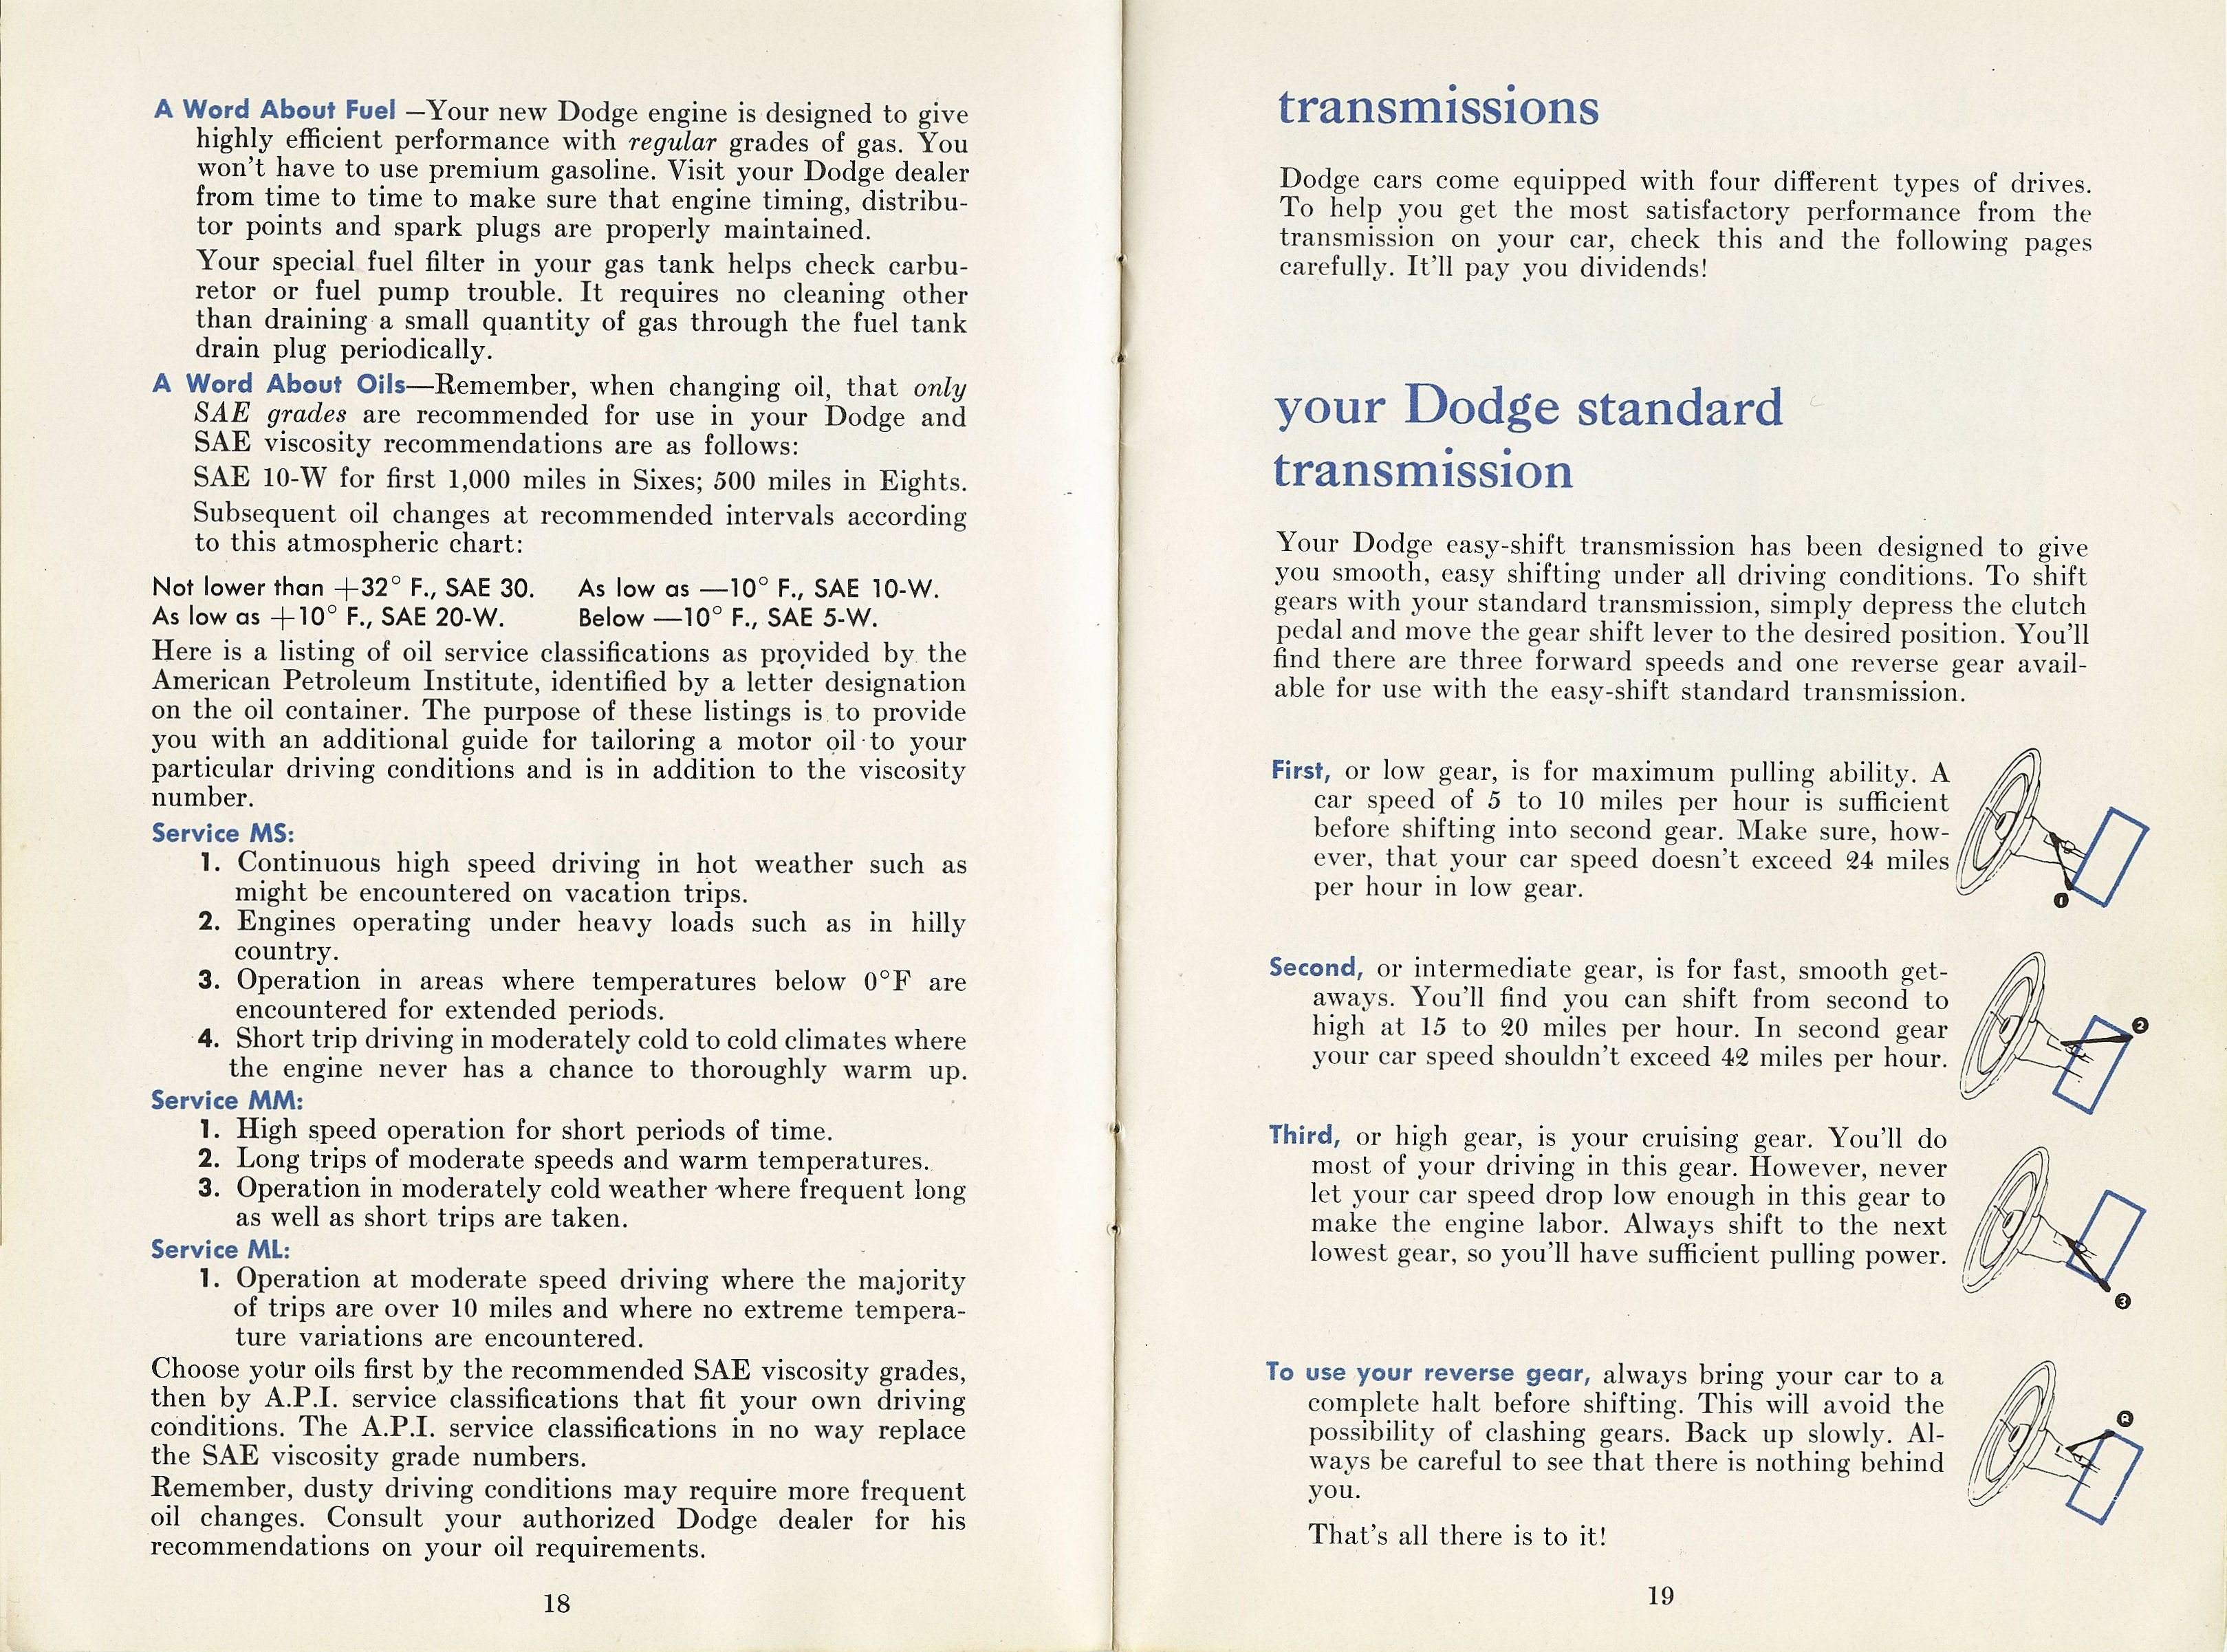 1954 Dodge Car Owners Manual Page 8